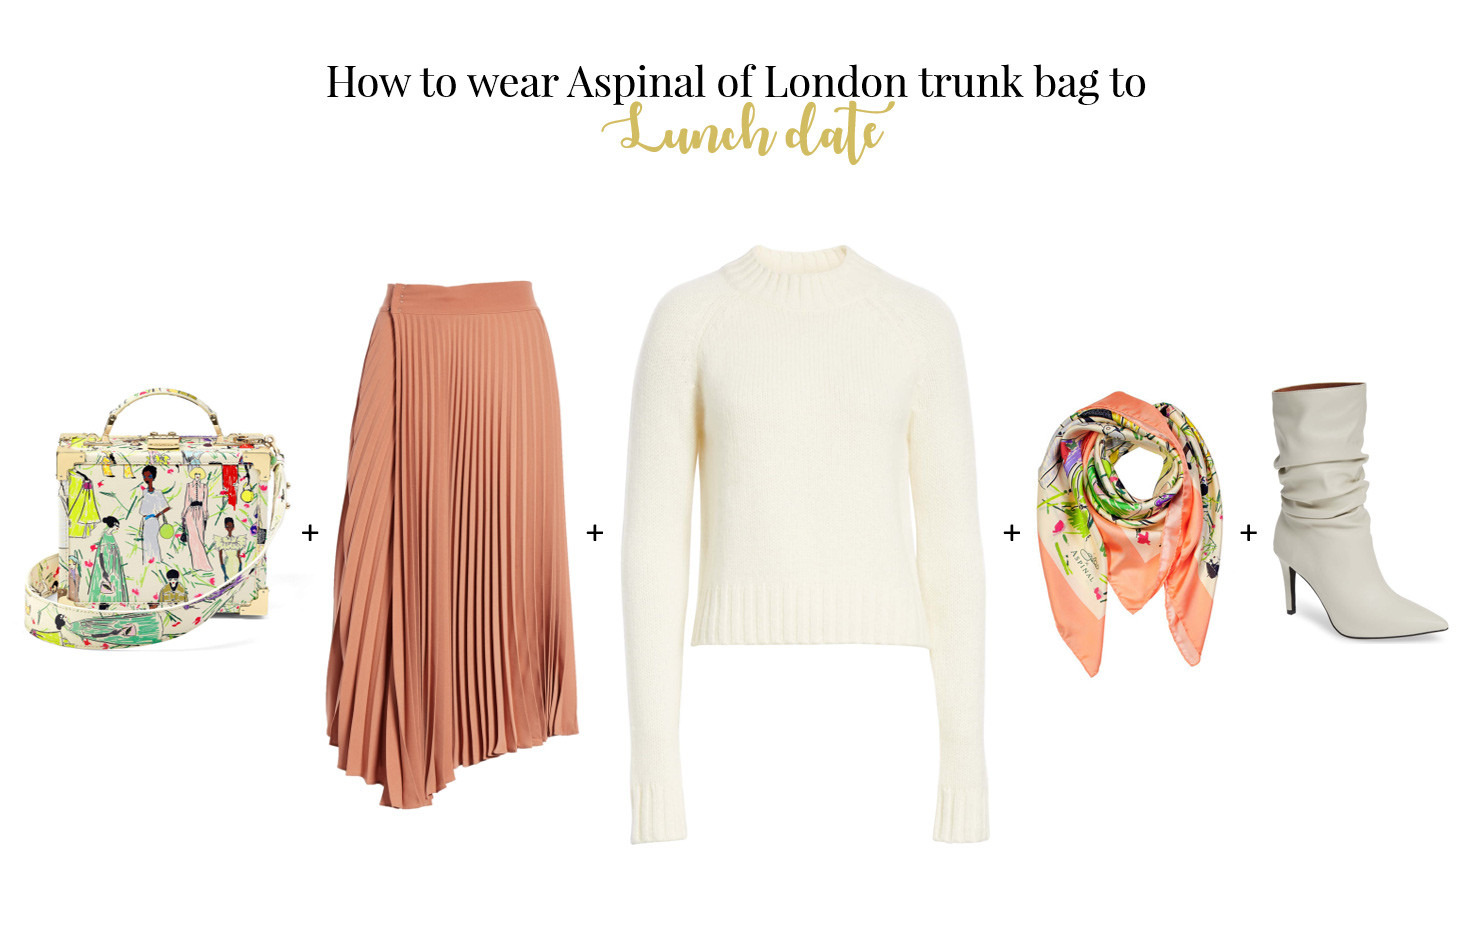 How to wear trunk bag for date Aspinal of London